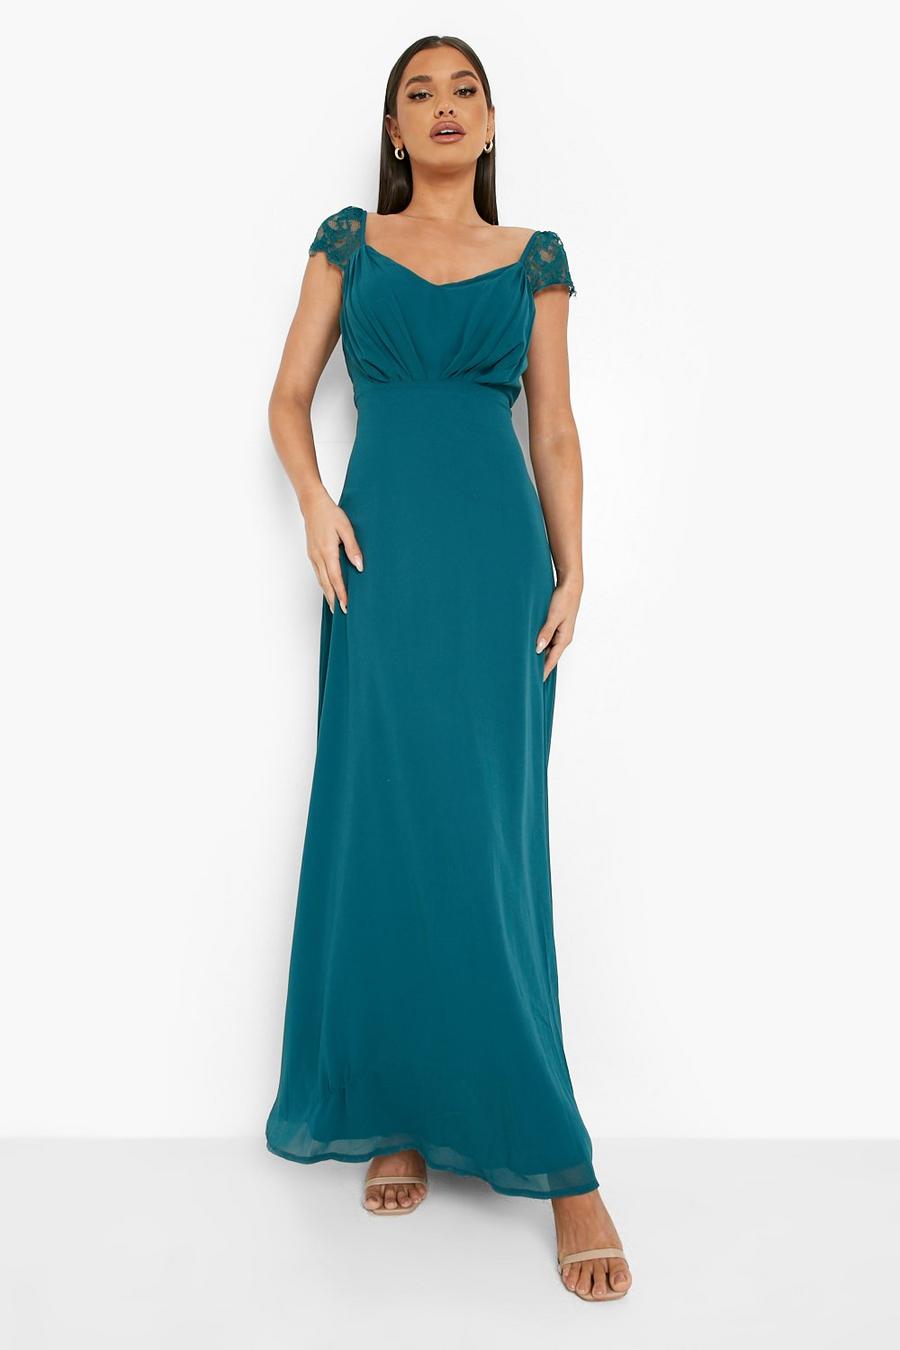 Forest green Lace Maxi Bridesmaid Dress